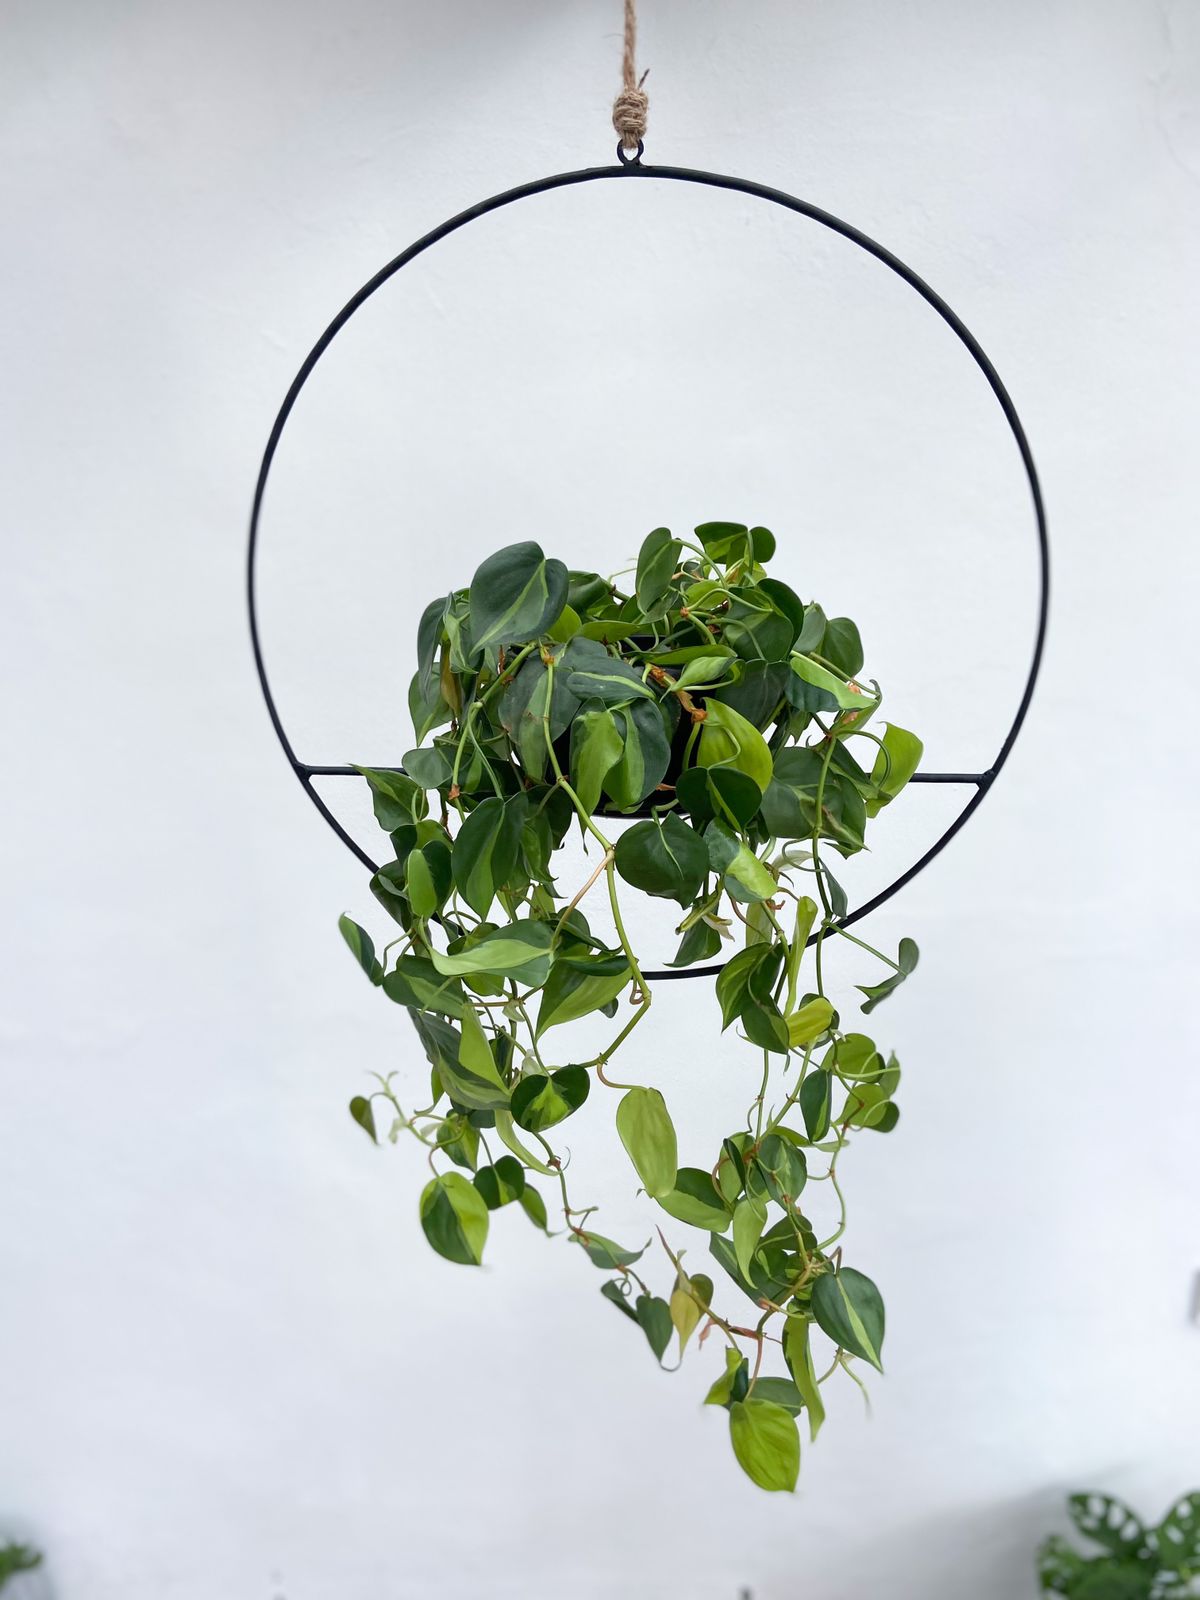 The Ring Planter